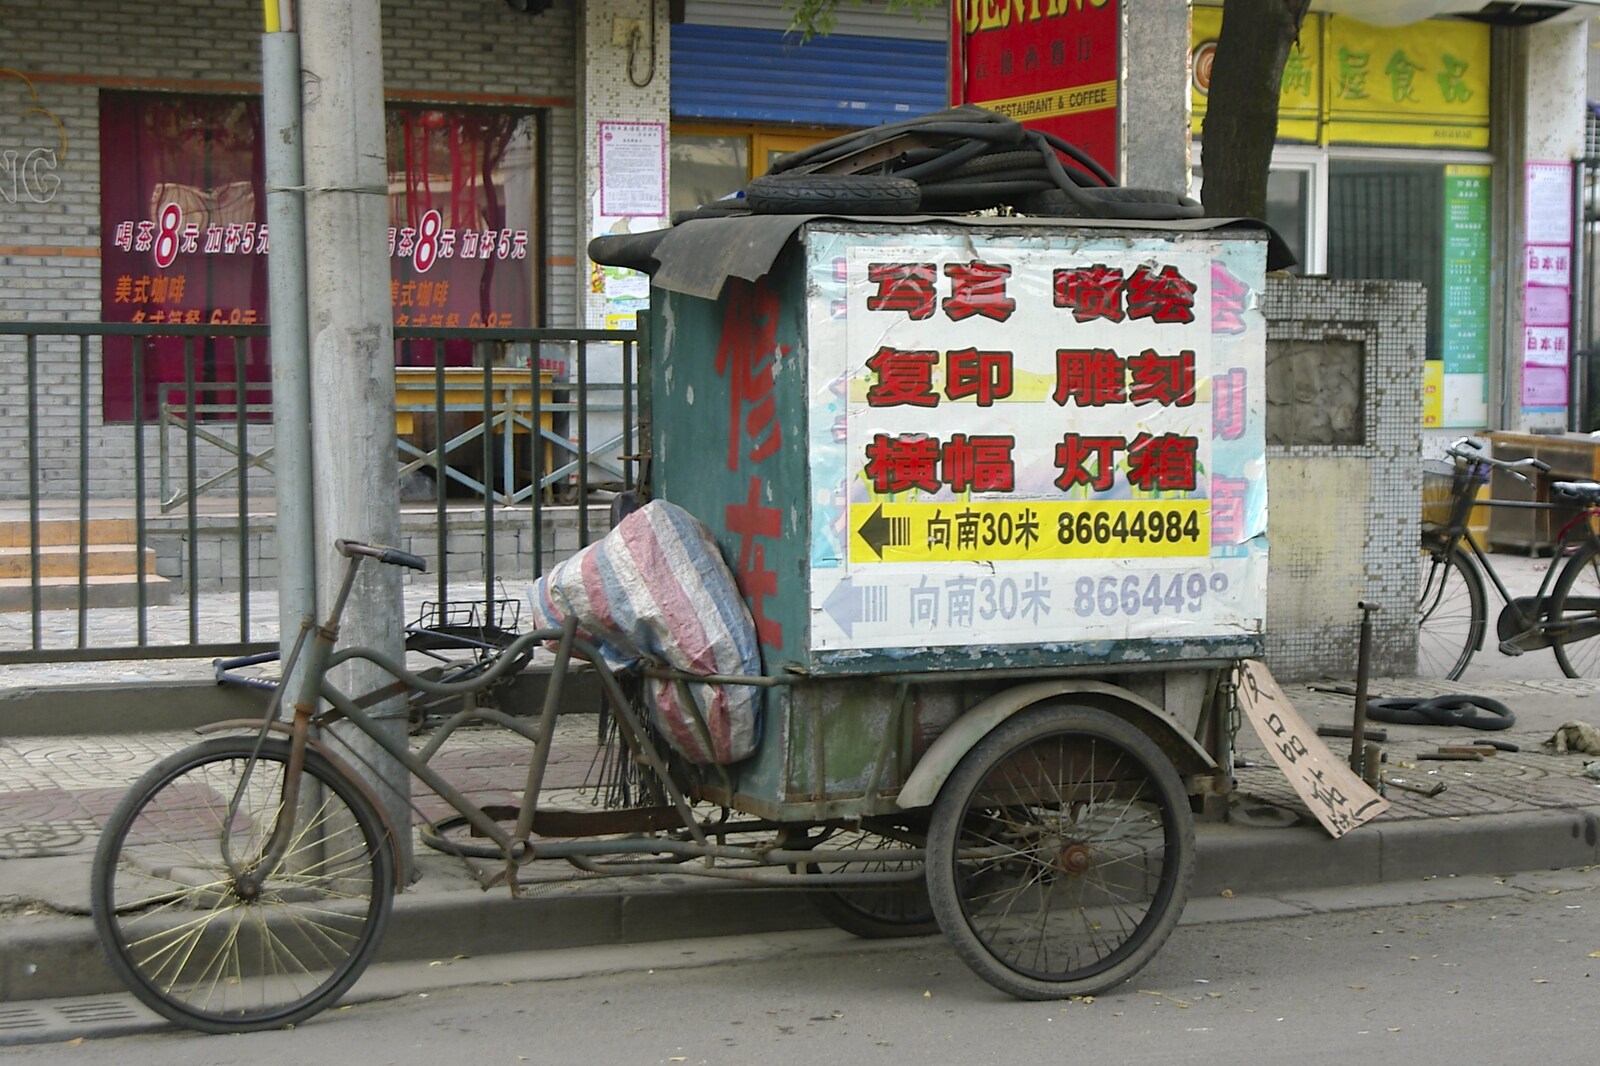 Some kind of shop-on-wheels from A Few Days in Nanjing, Jiangsu Province, China - 7th October 2006